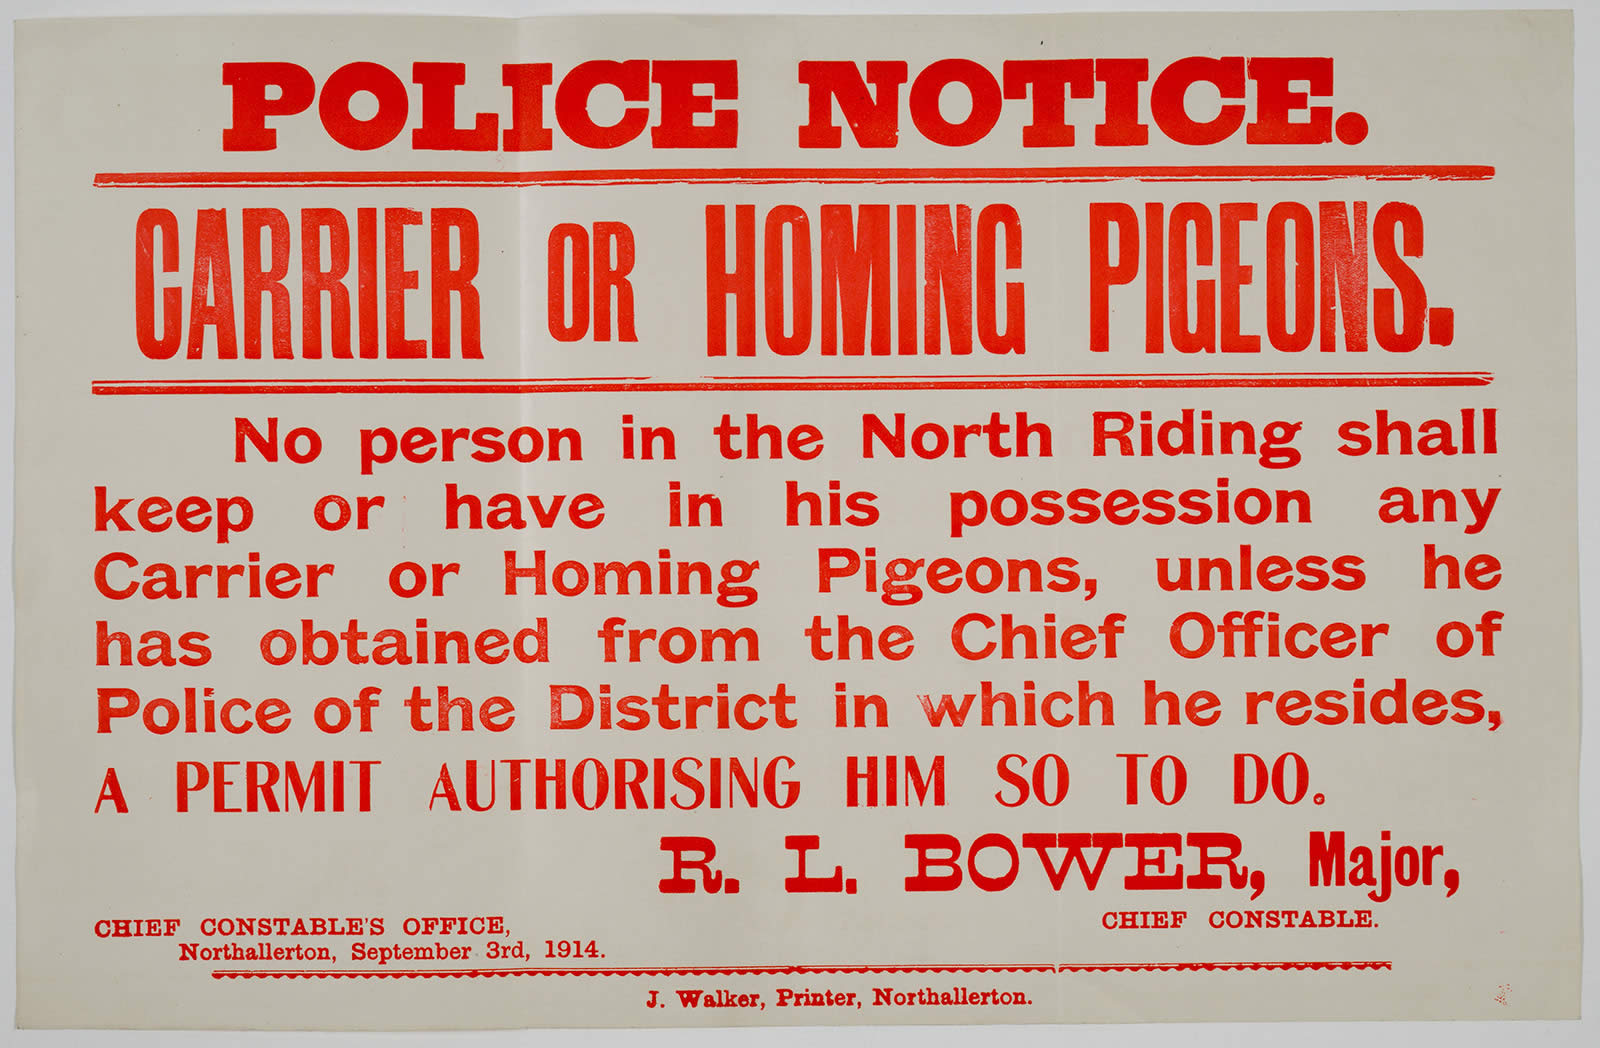 Image of a police notice of 1914 warning owners of homing pigeons that they need a permit 